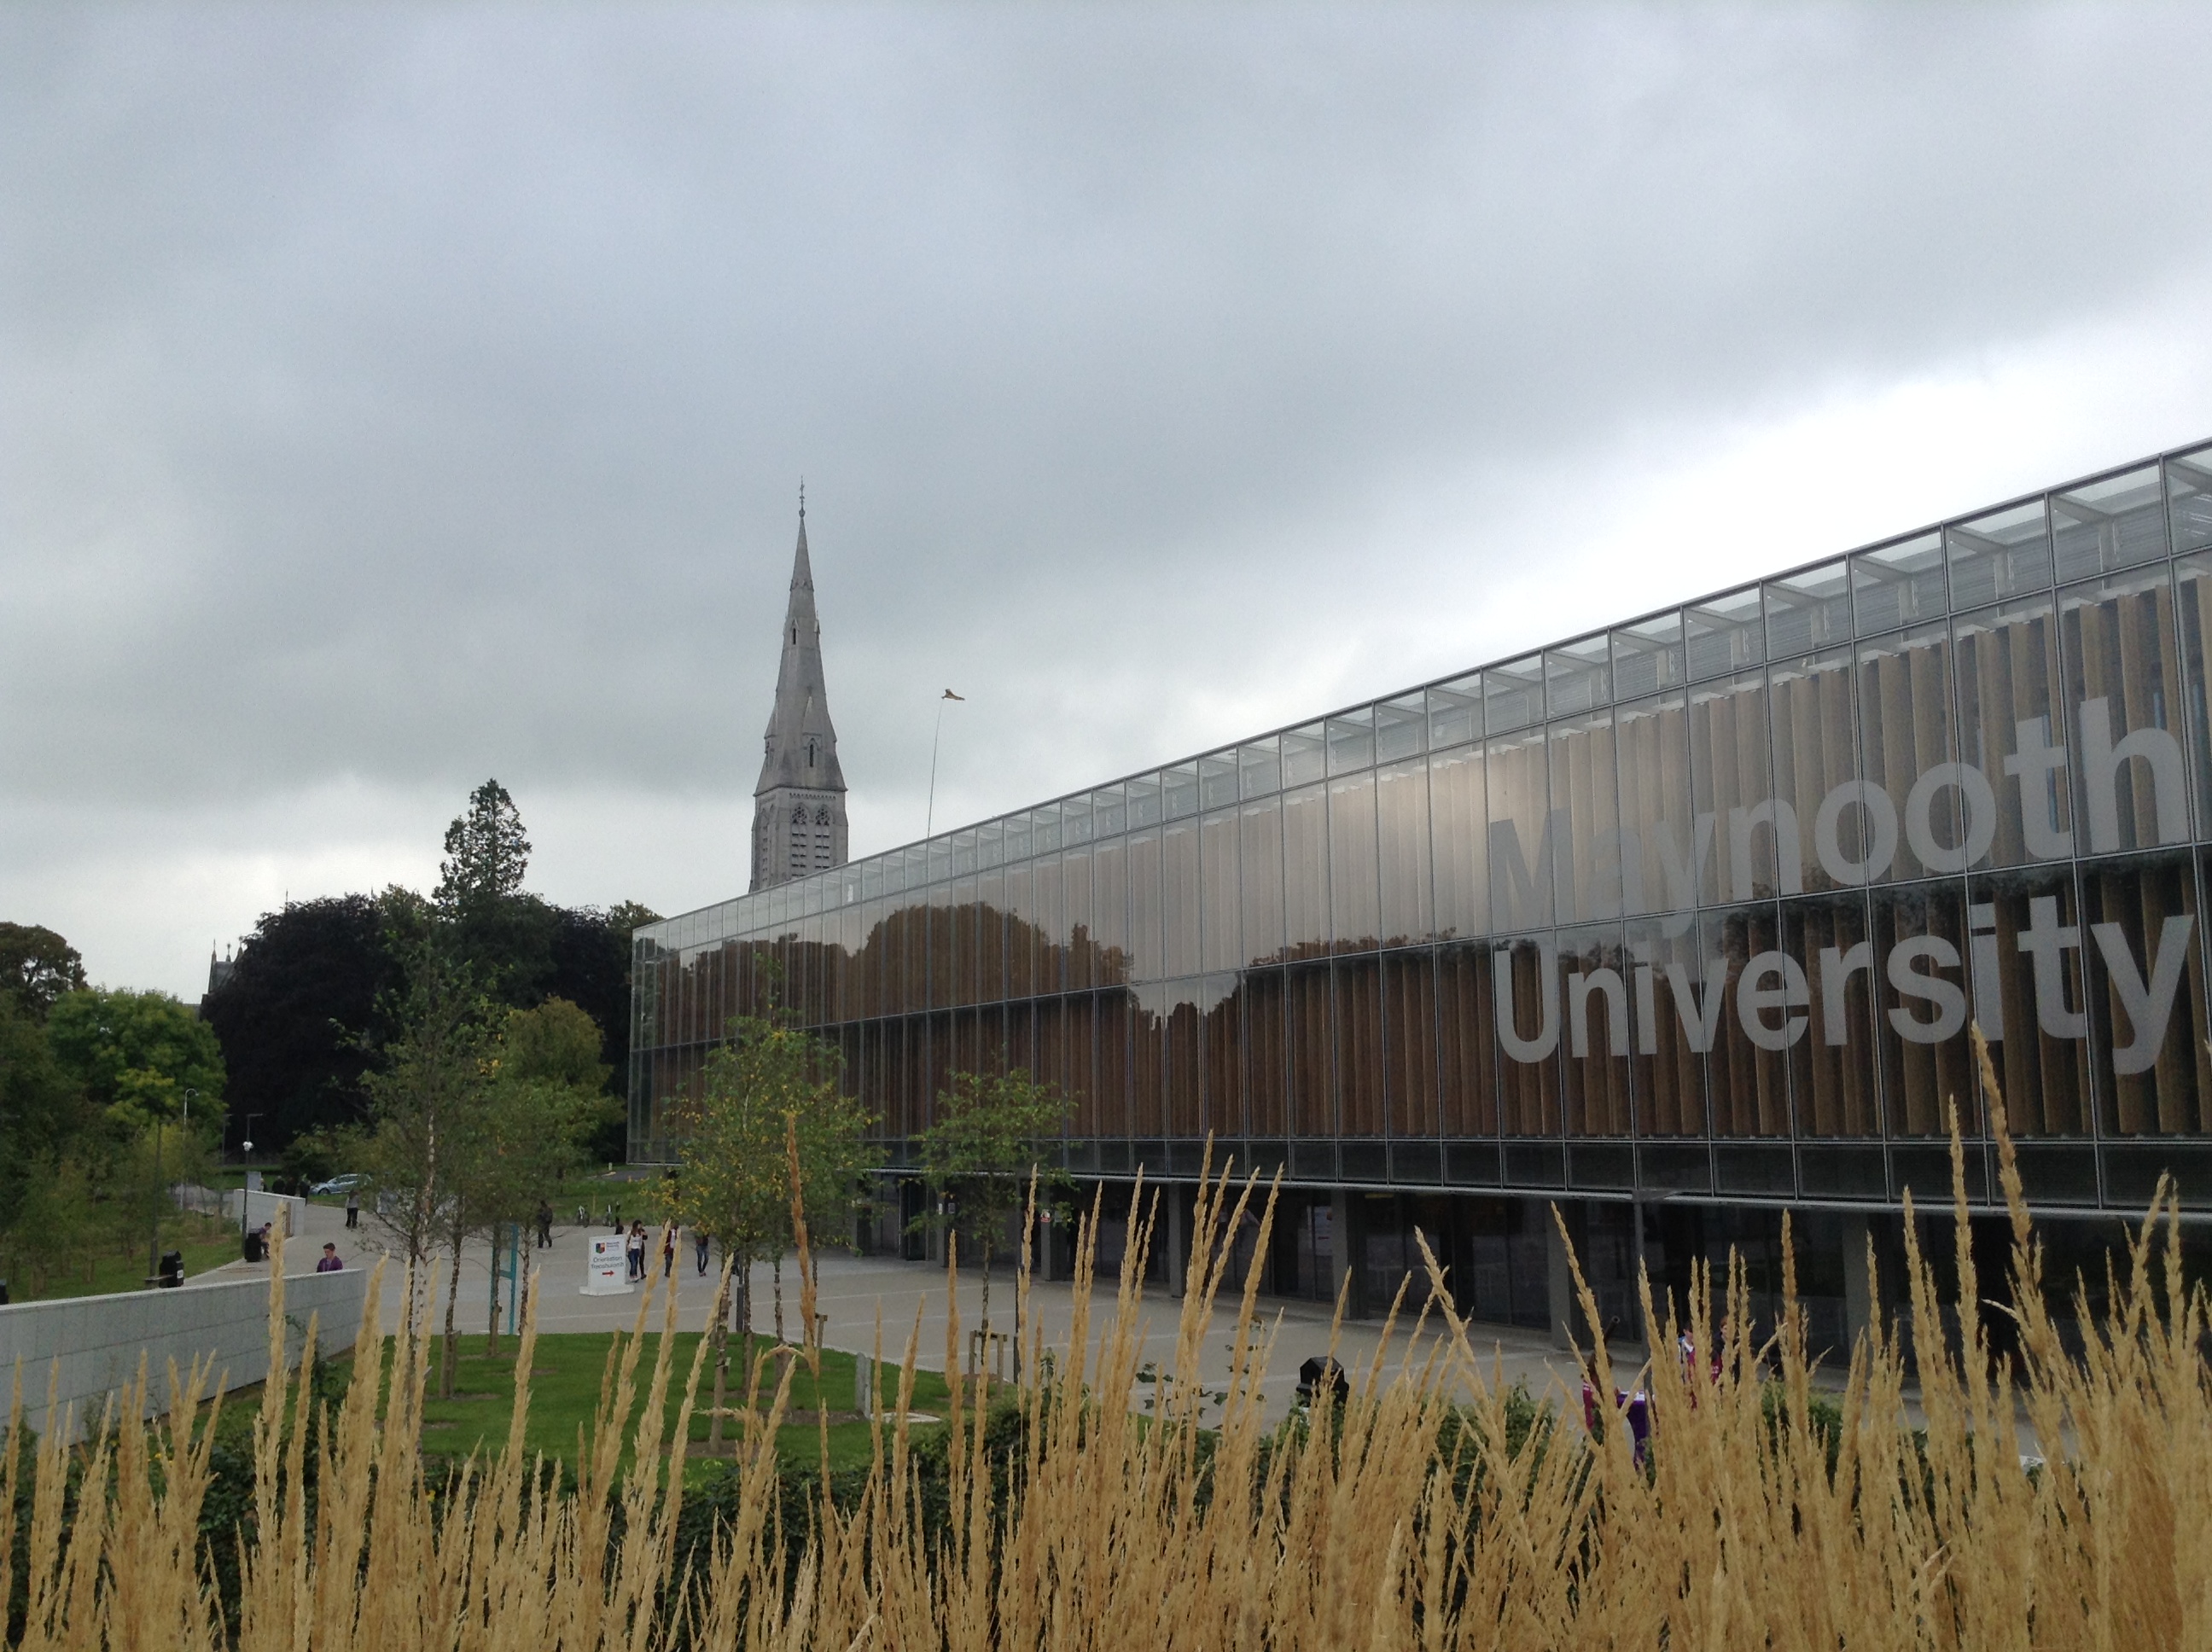 Maynooth Library